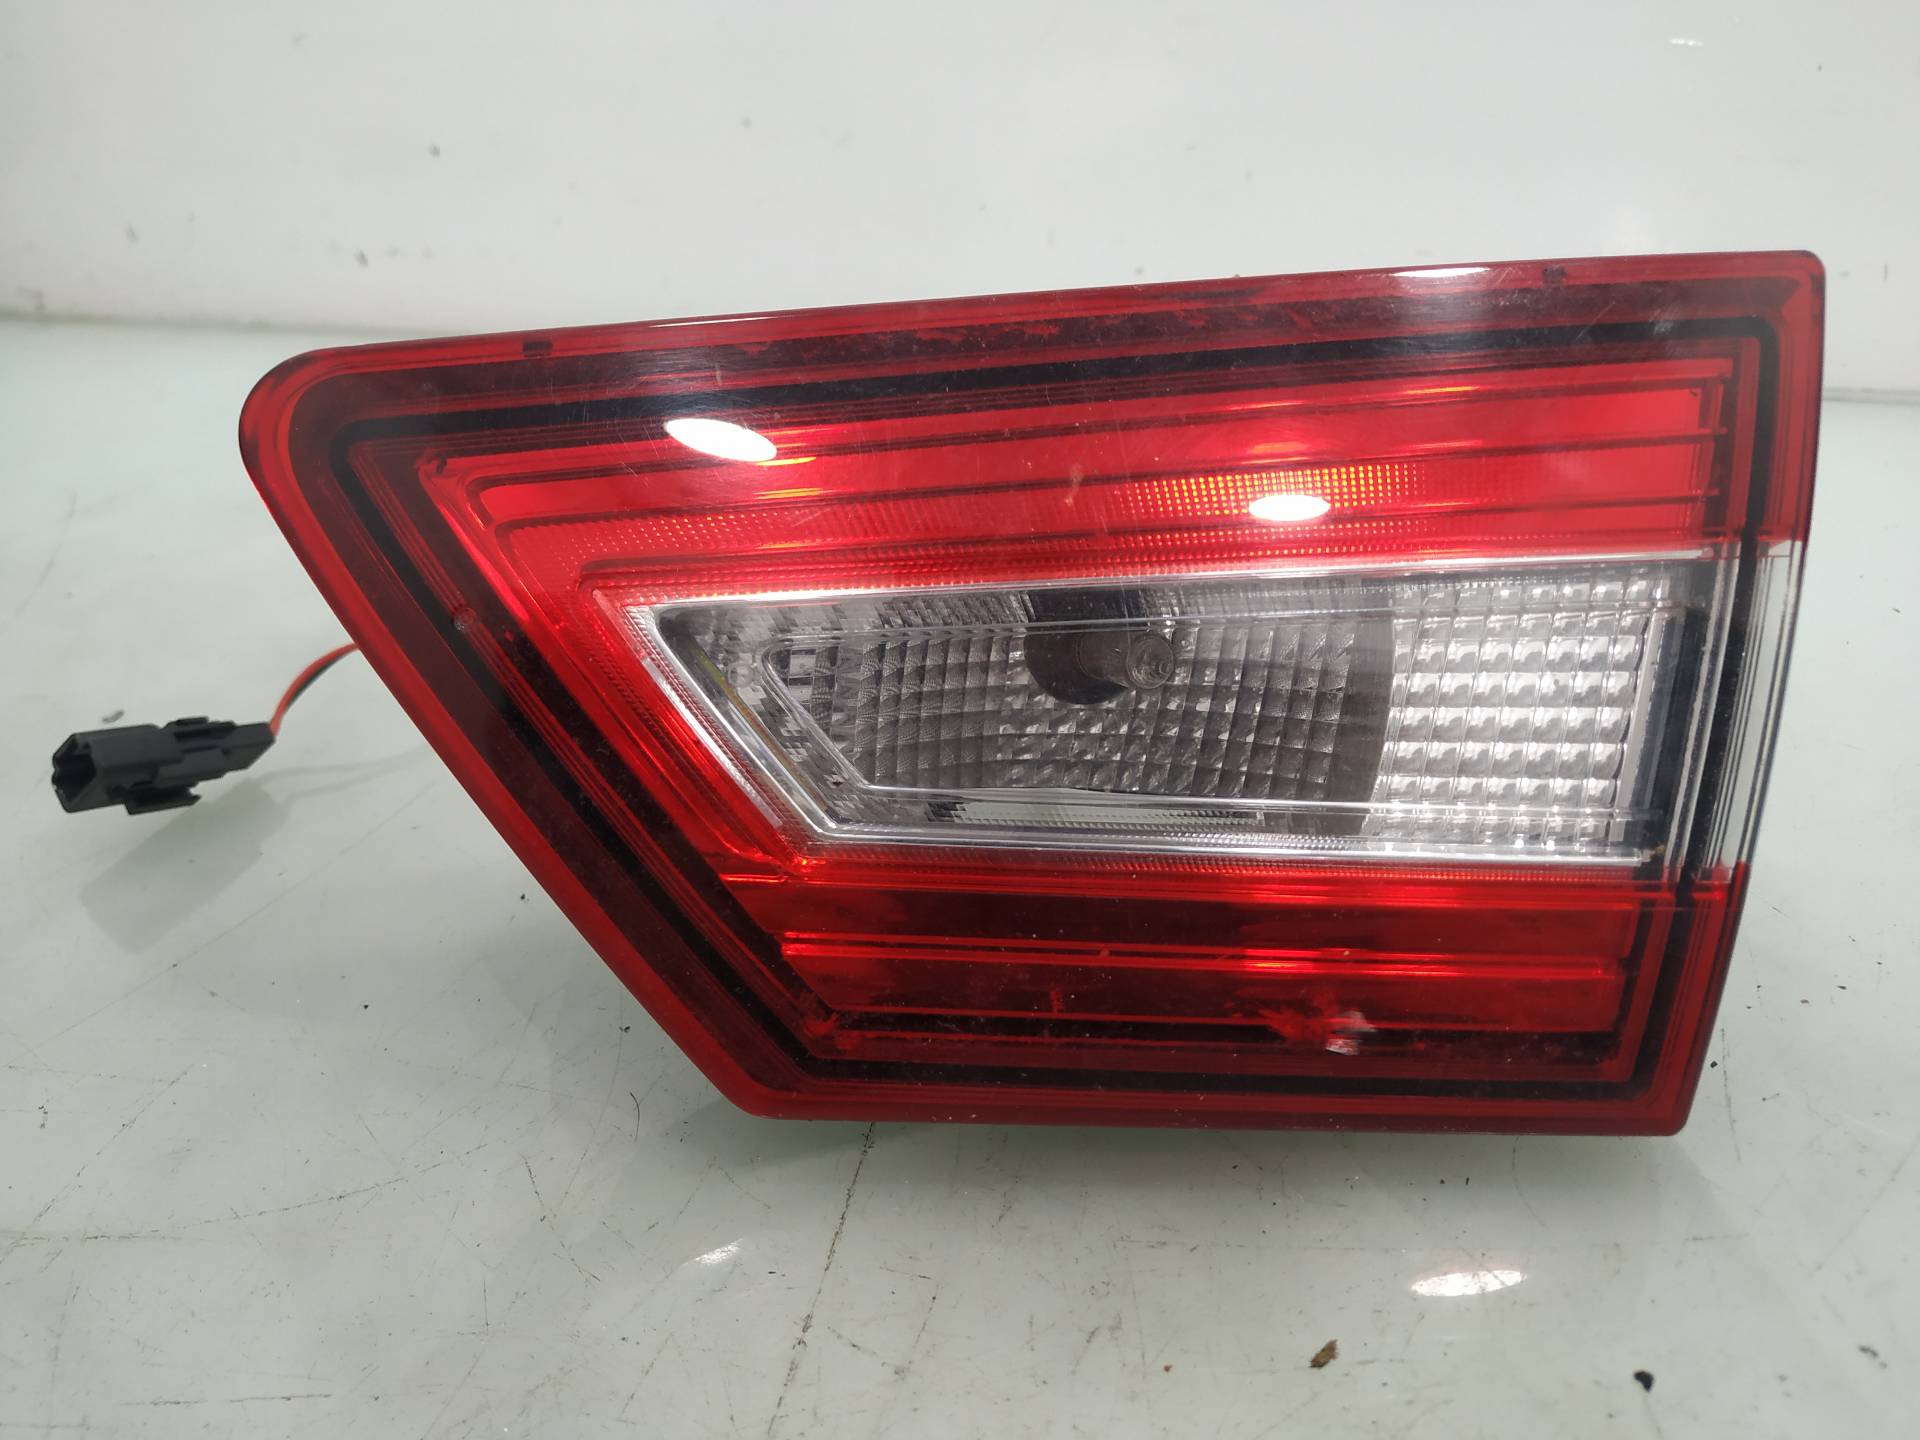 RENAULT Clio 3 generation (2005-2012) Rear Right Taillight Lamp 265505796R 19052226